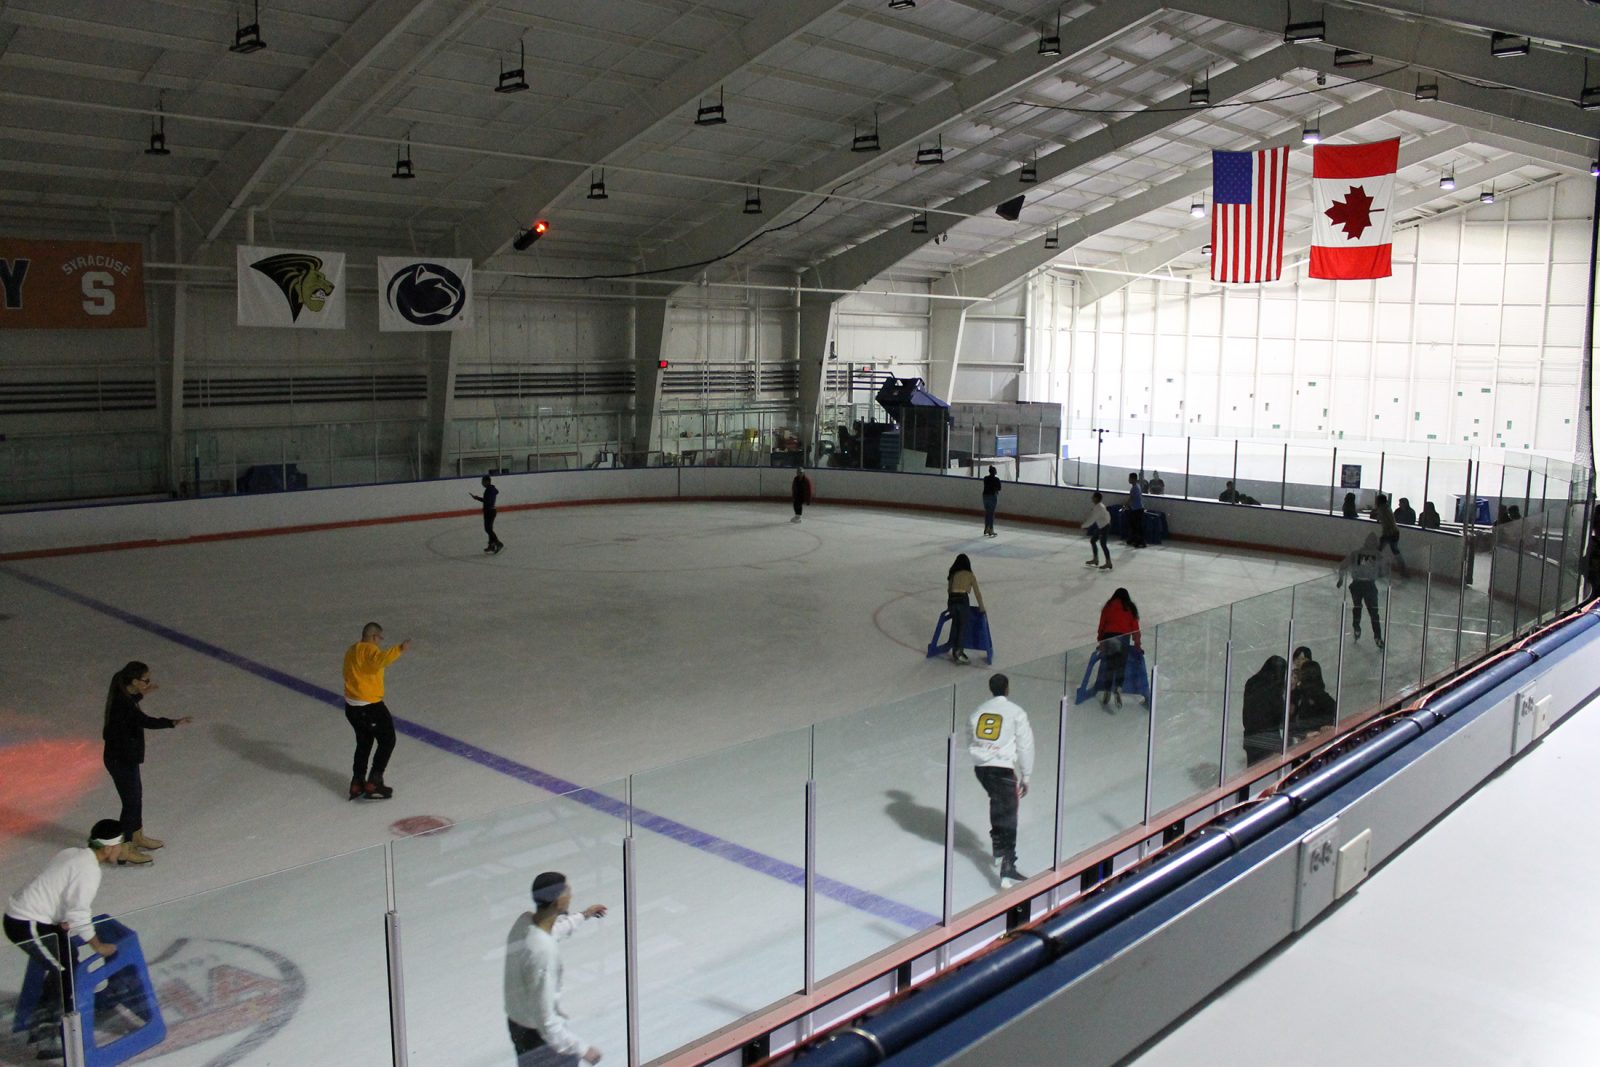 Center Ice Arena  Come and cool off at Atlanta's skating facility